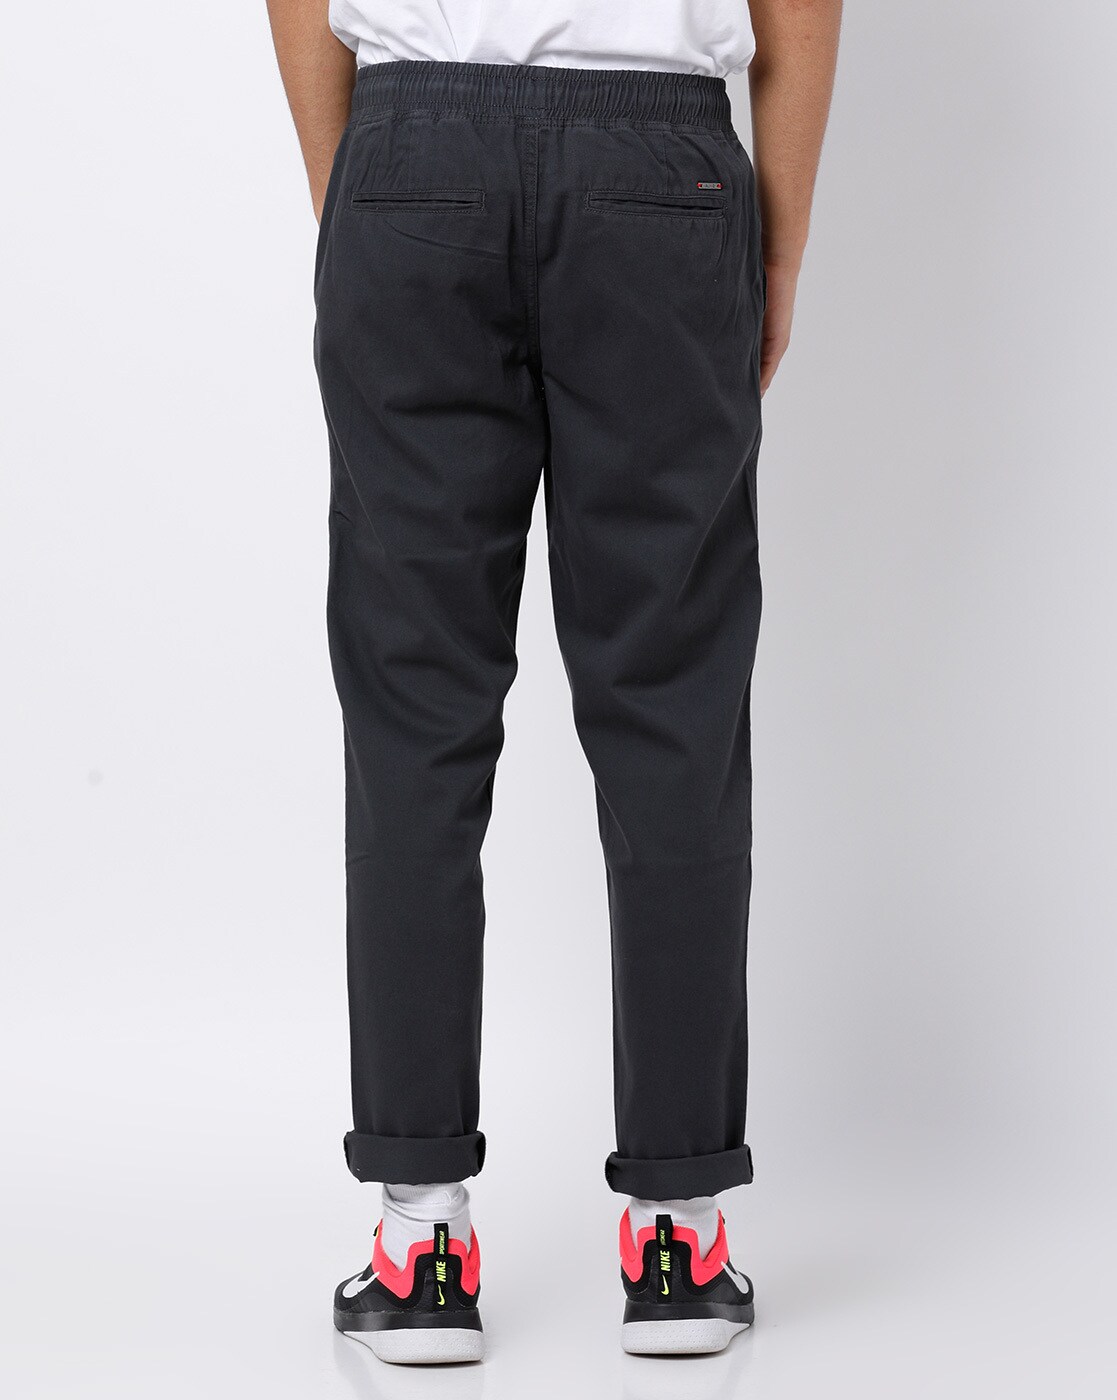 Mens Scullers Trousers - Buy Mens Scullers Trousers online in India